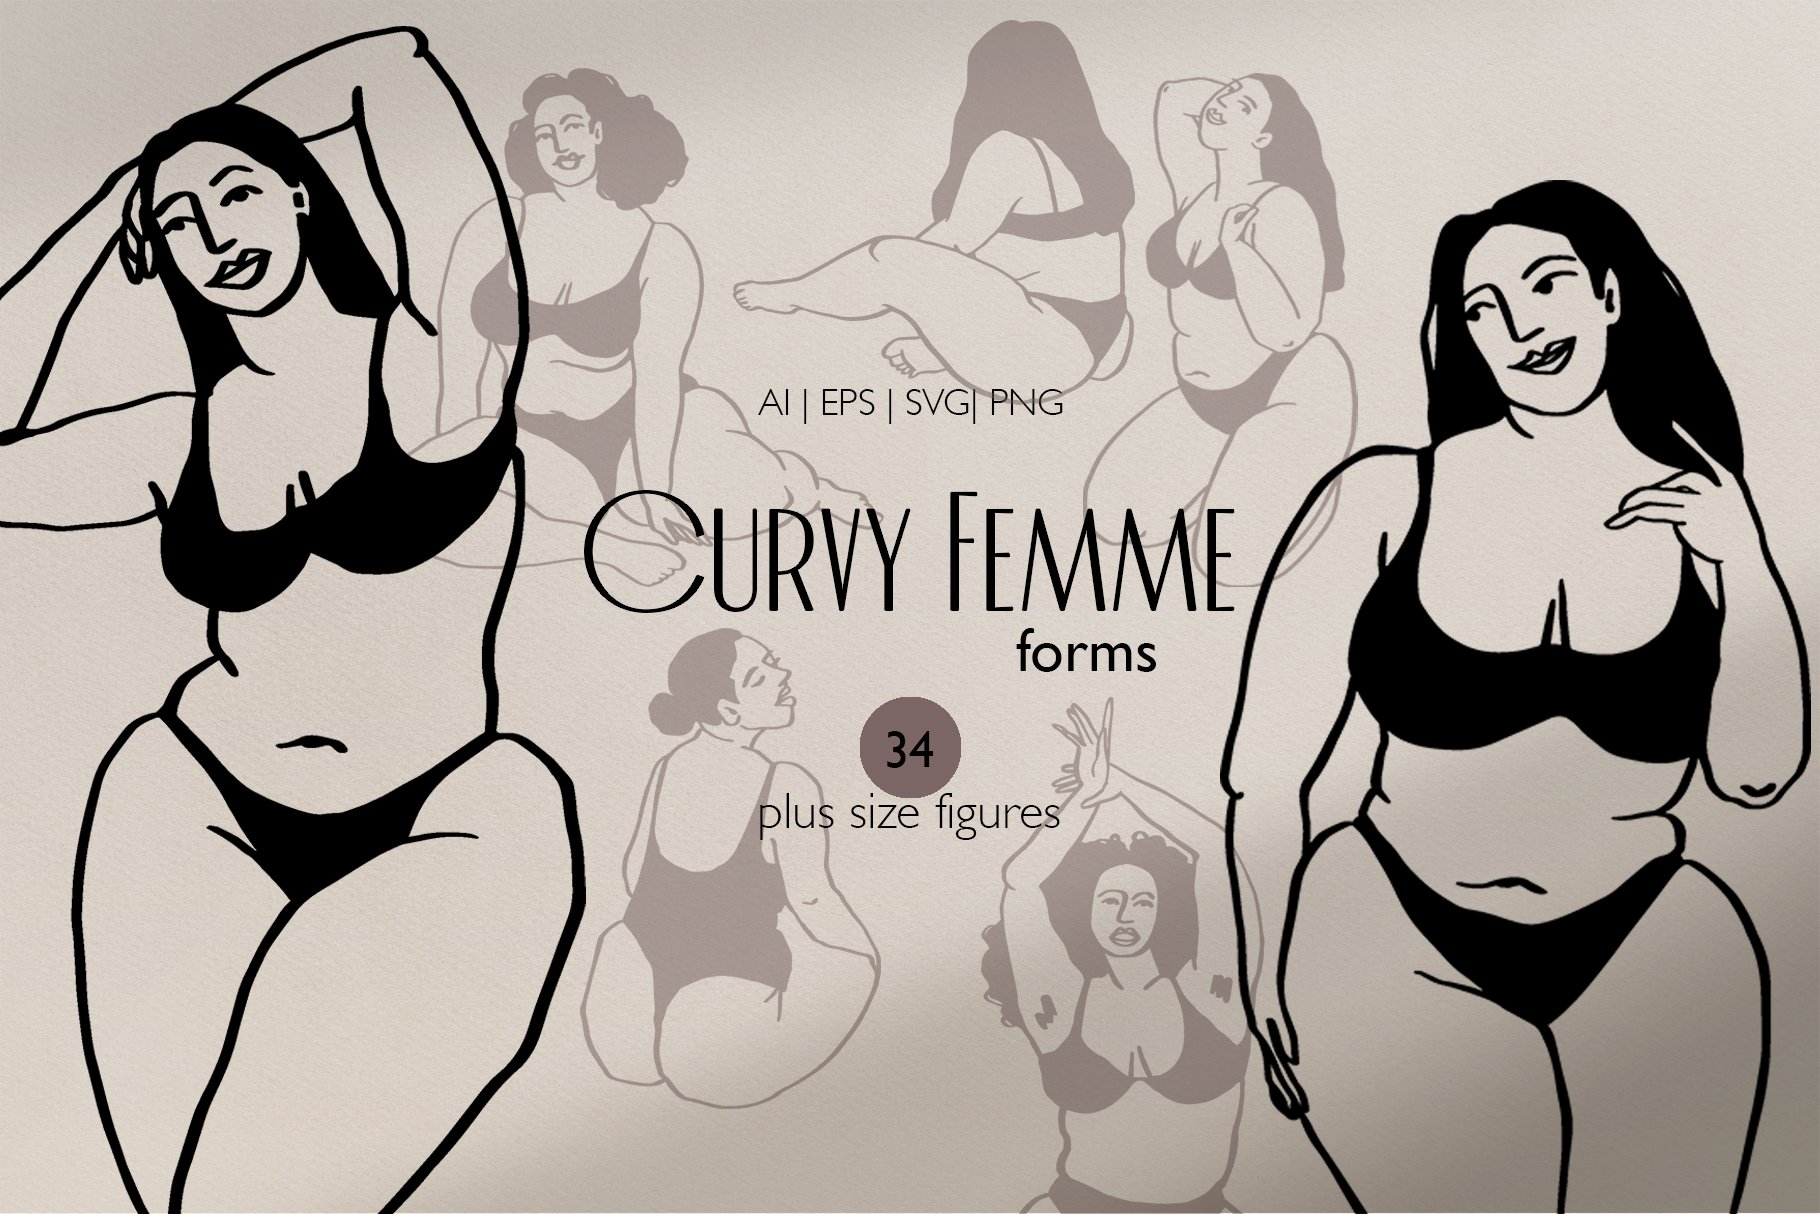 Plus size woman in a swimsuit. Female curvy character. Positive